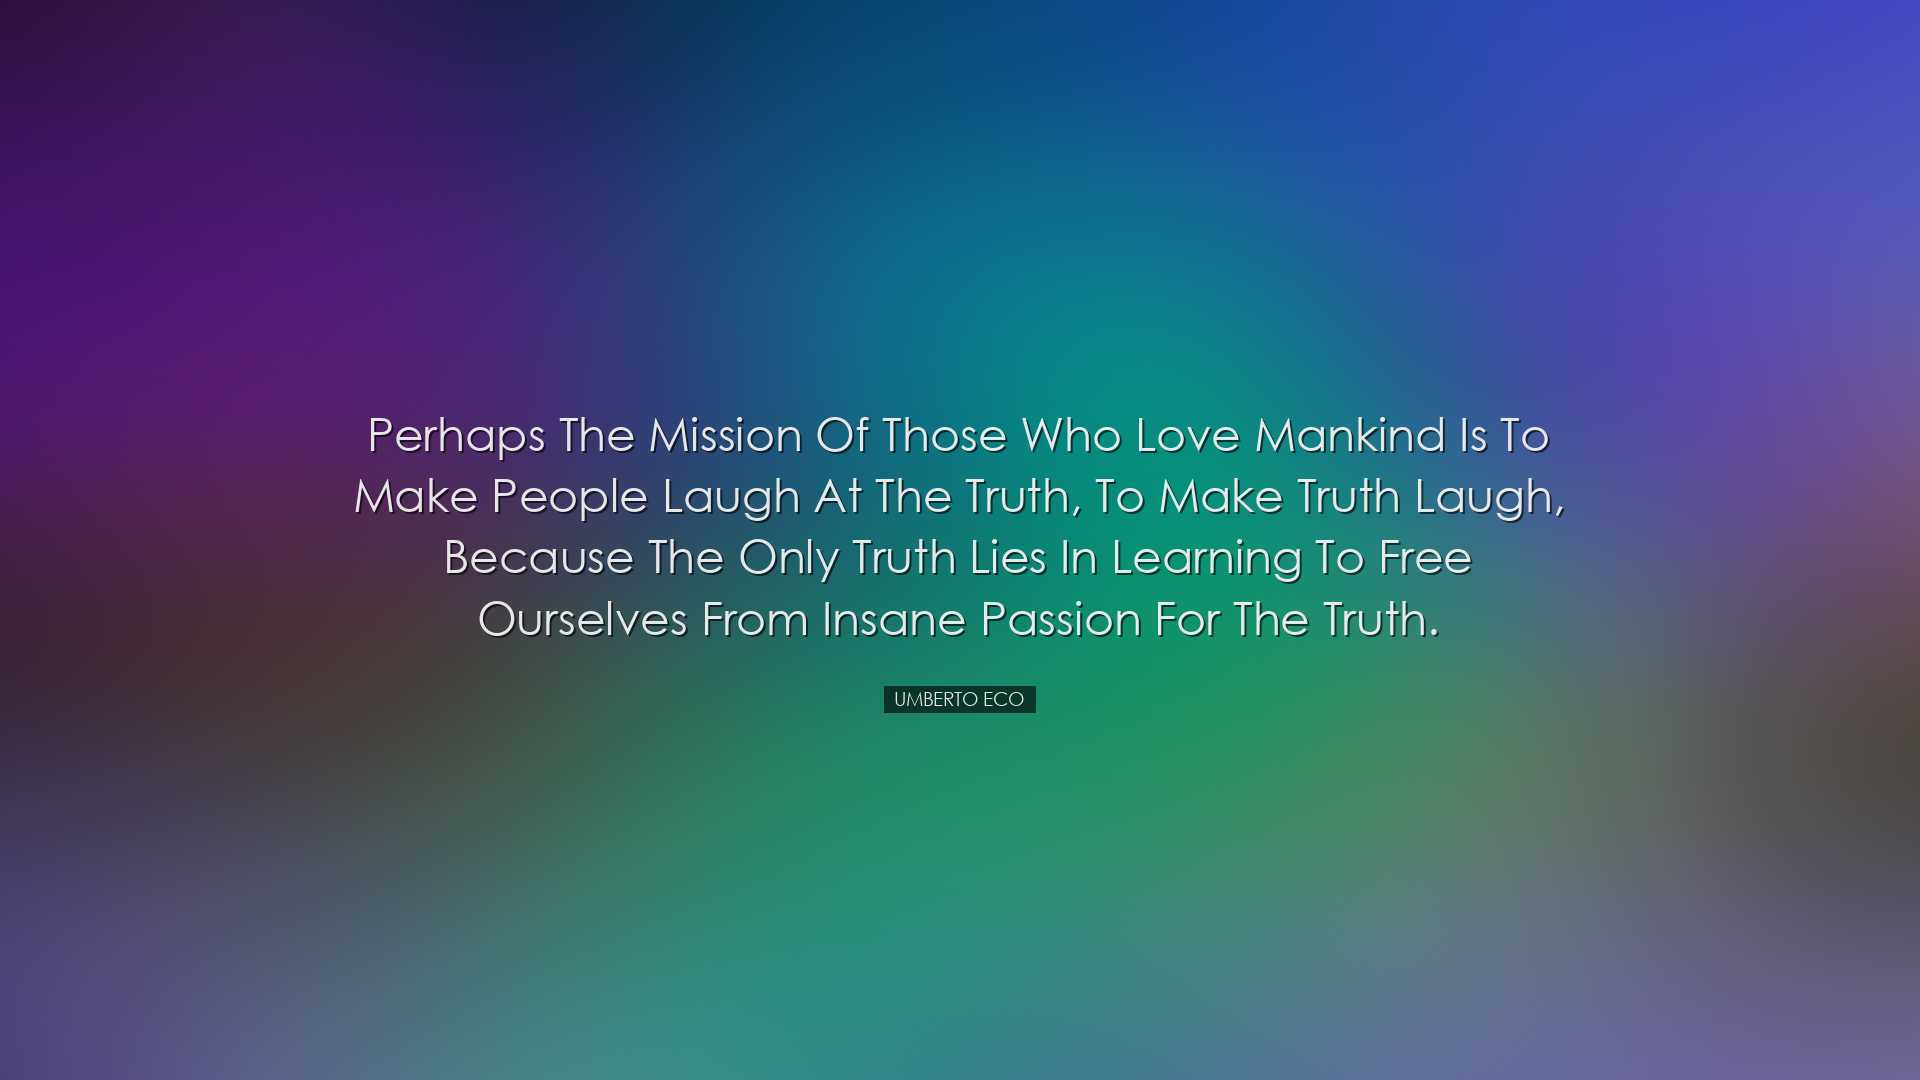 Perhaps the mission of those who love mankind is to make people la